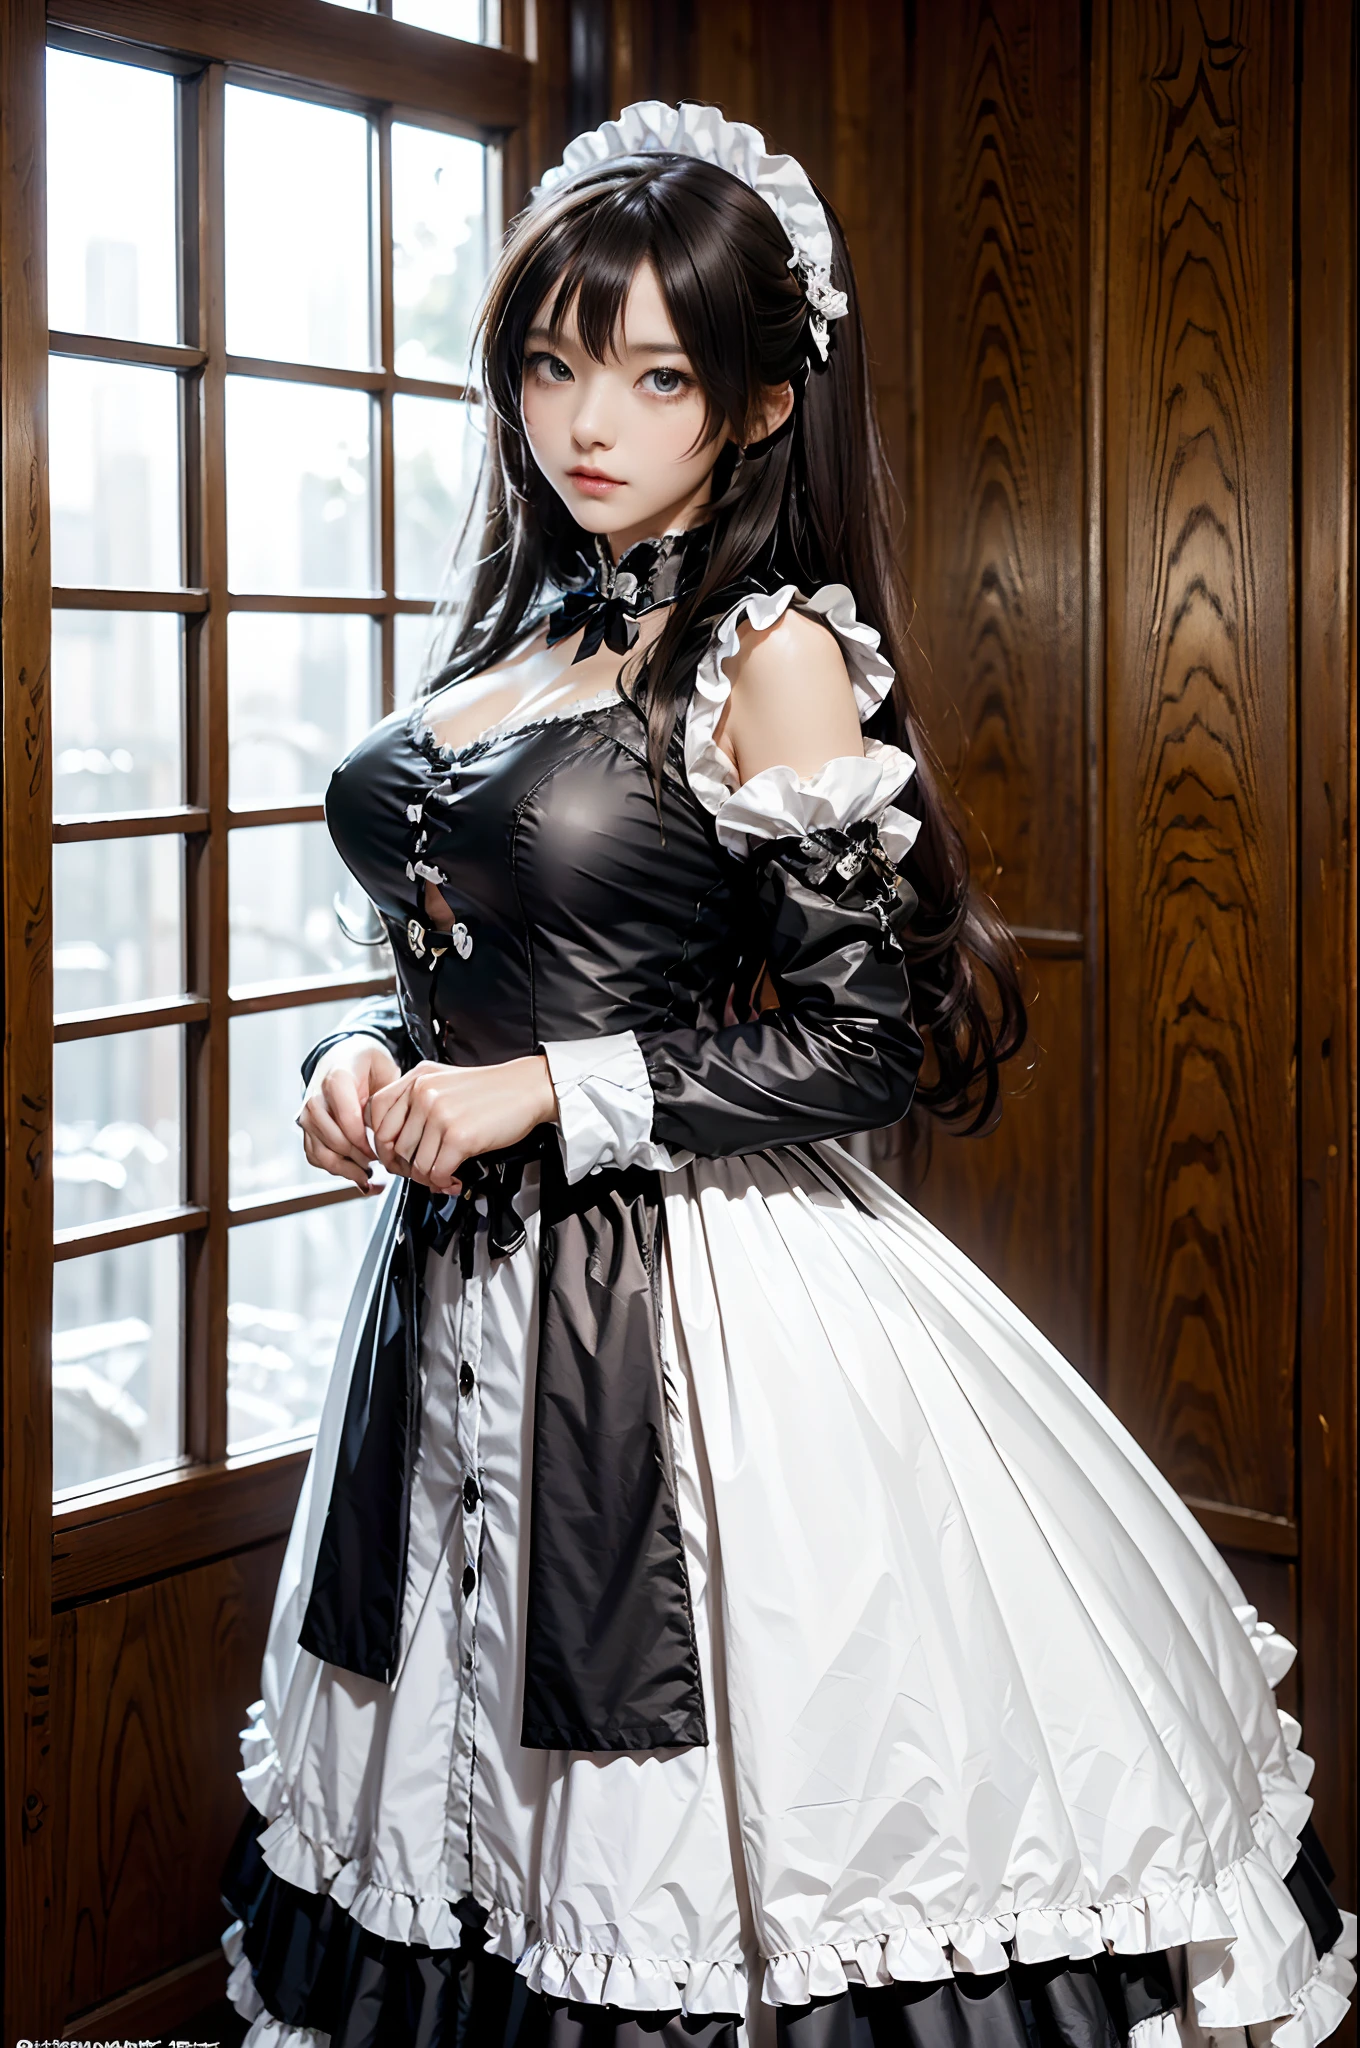 The woman, (European Citizenship: 1.2) In a black and white outfit posing for a photo, maiden! Dress, Anime Girl Cosplay, anime girl in a maid costume, The Magnificent Maiden, maid outfit, cosplay photo, cosplay, anime cosplay, A Few Cute Poses, (Face of the Goddess), (Elegant posture: 1.4), Elegant atmosphere, Noble atmosphere, (Milf: 1.6) (Brown hair: 1.5), (golden eyes: 1.4), (maidservant: 1.4), (Black and White Maid Outfit: 1.1), (Incredible beauty, High facial detail: 1.3),